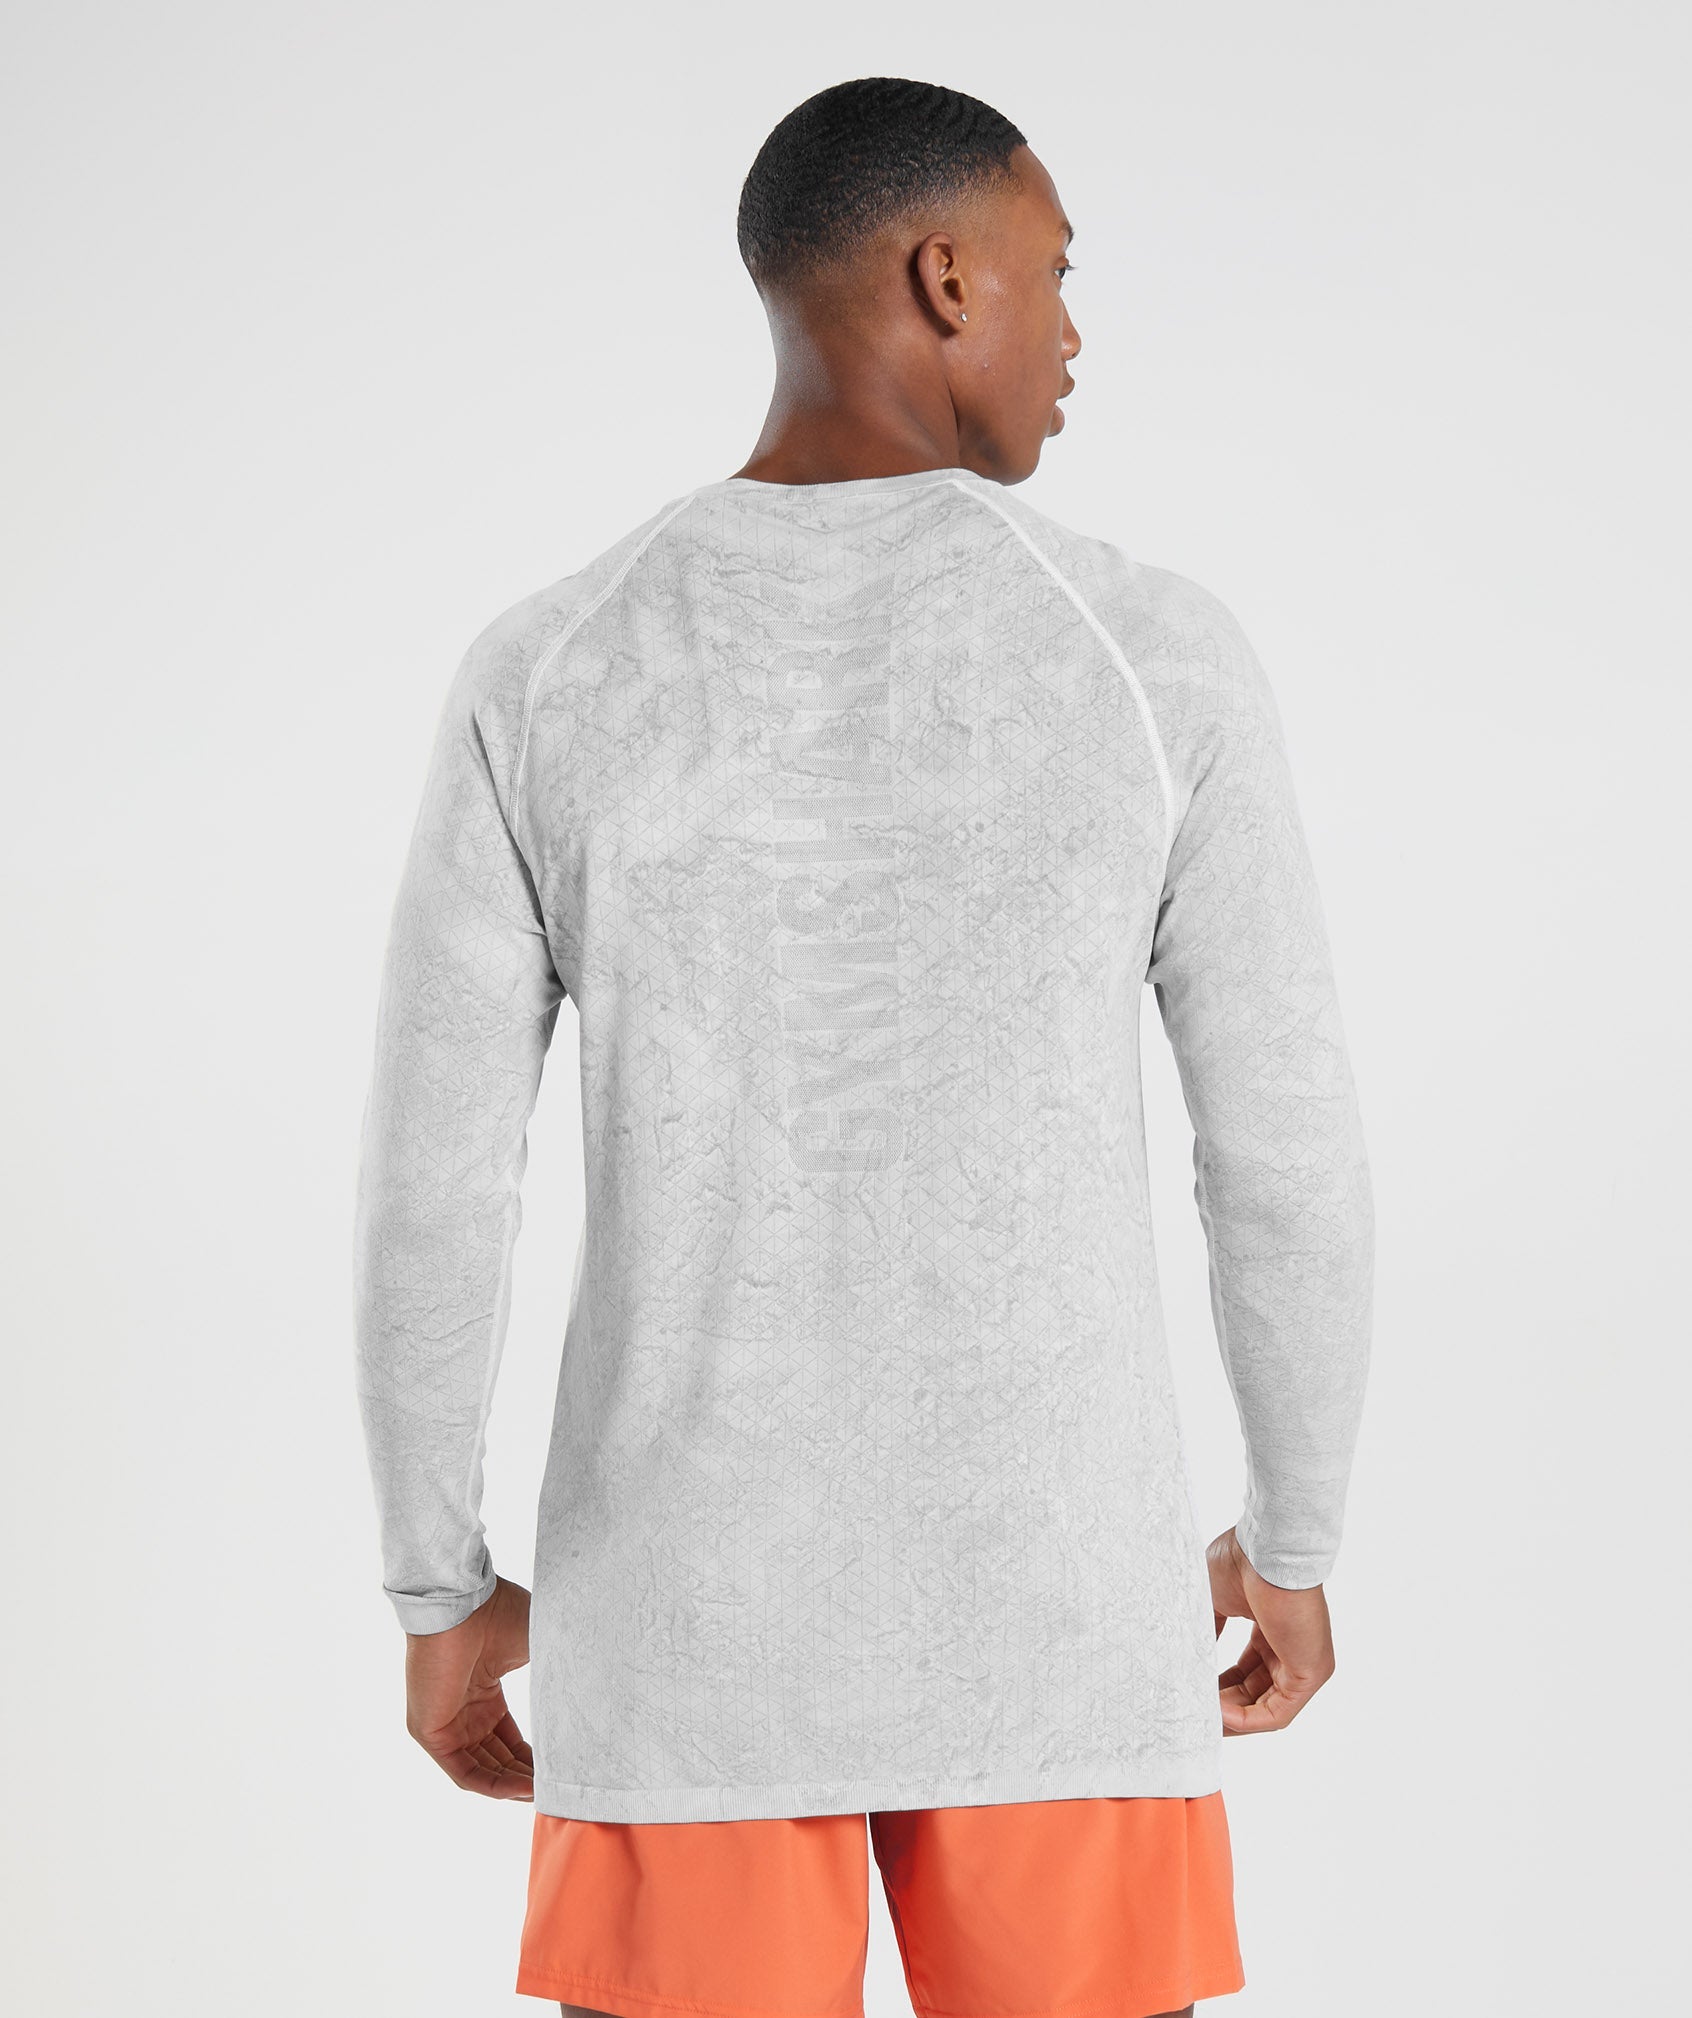 Geo Seamless Long Sleeve T-Shirt in White/Light Grey - view 2